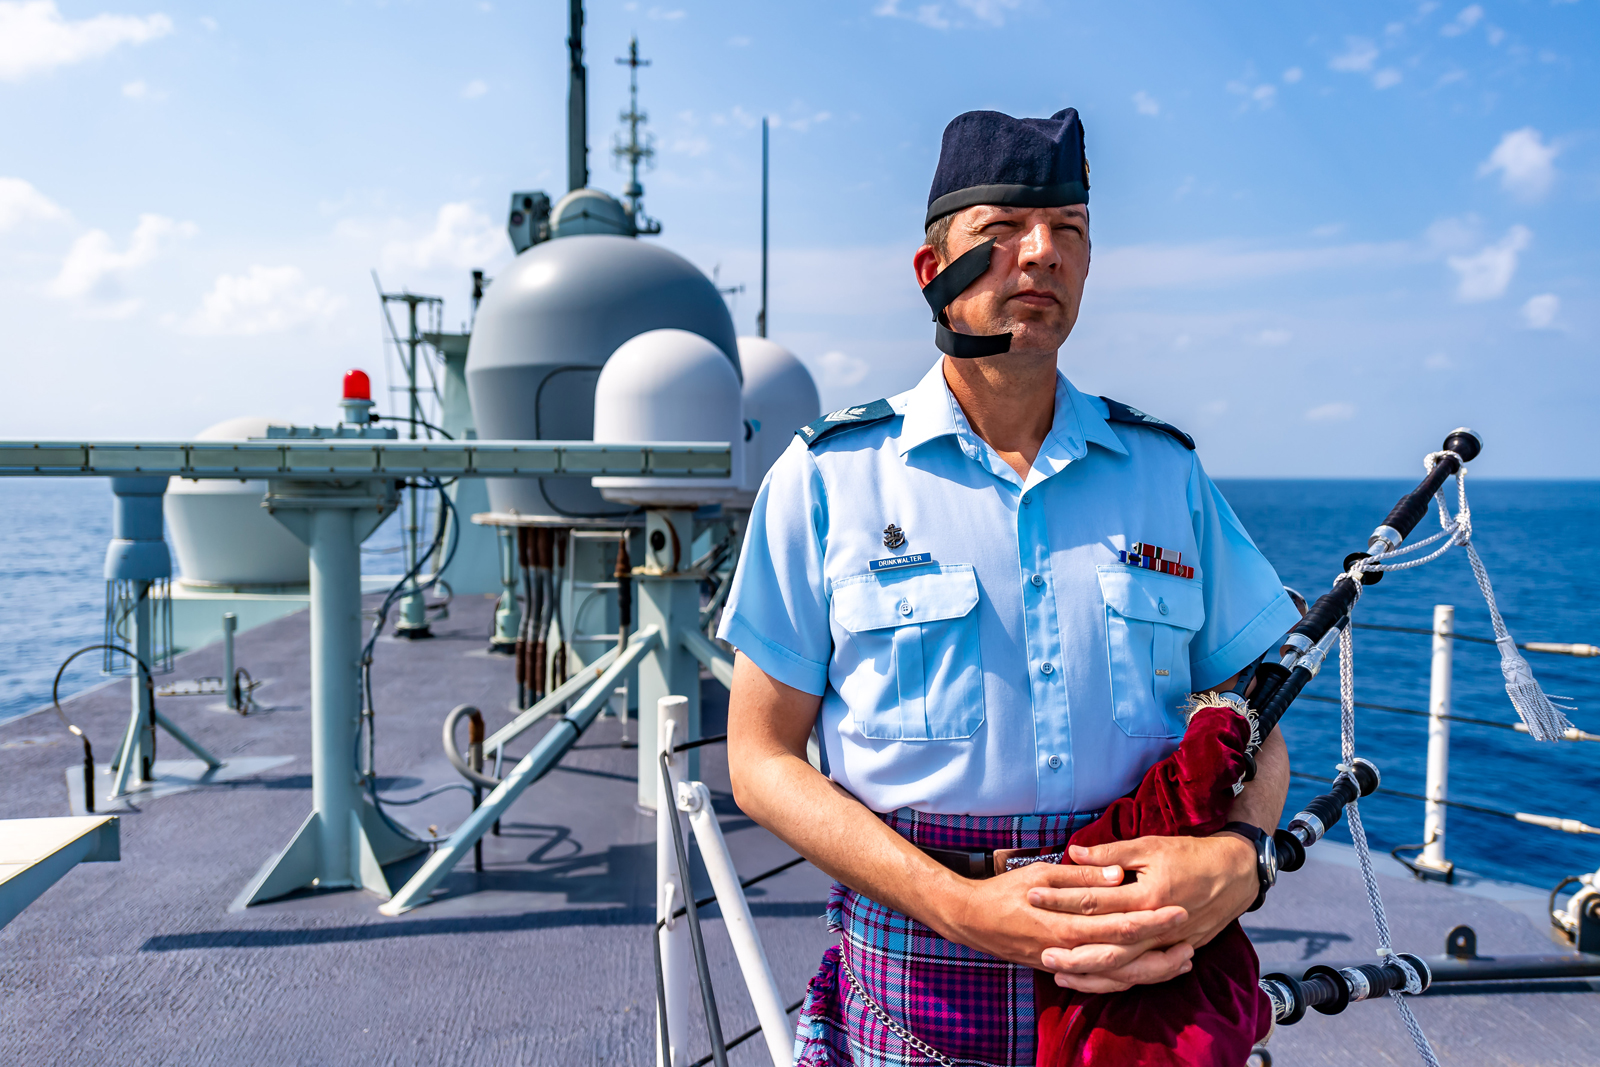 Sergeant Steven Drinkwalter played the bag pipes during the Battle of the Atlantic ceremony on May 2 in the Arabian Sea while the ship was on Operation Artemis and part of Combined Task Force 150. Photo by Cpl Lynette Ai Dang, HMCS Calgary Imagery Technician